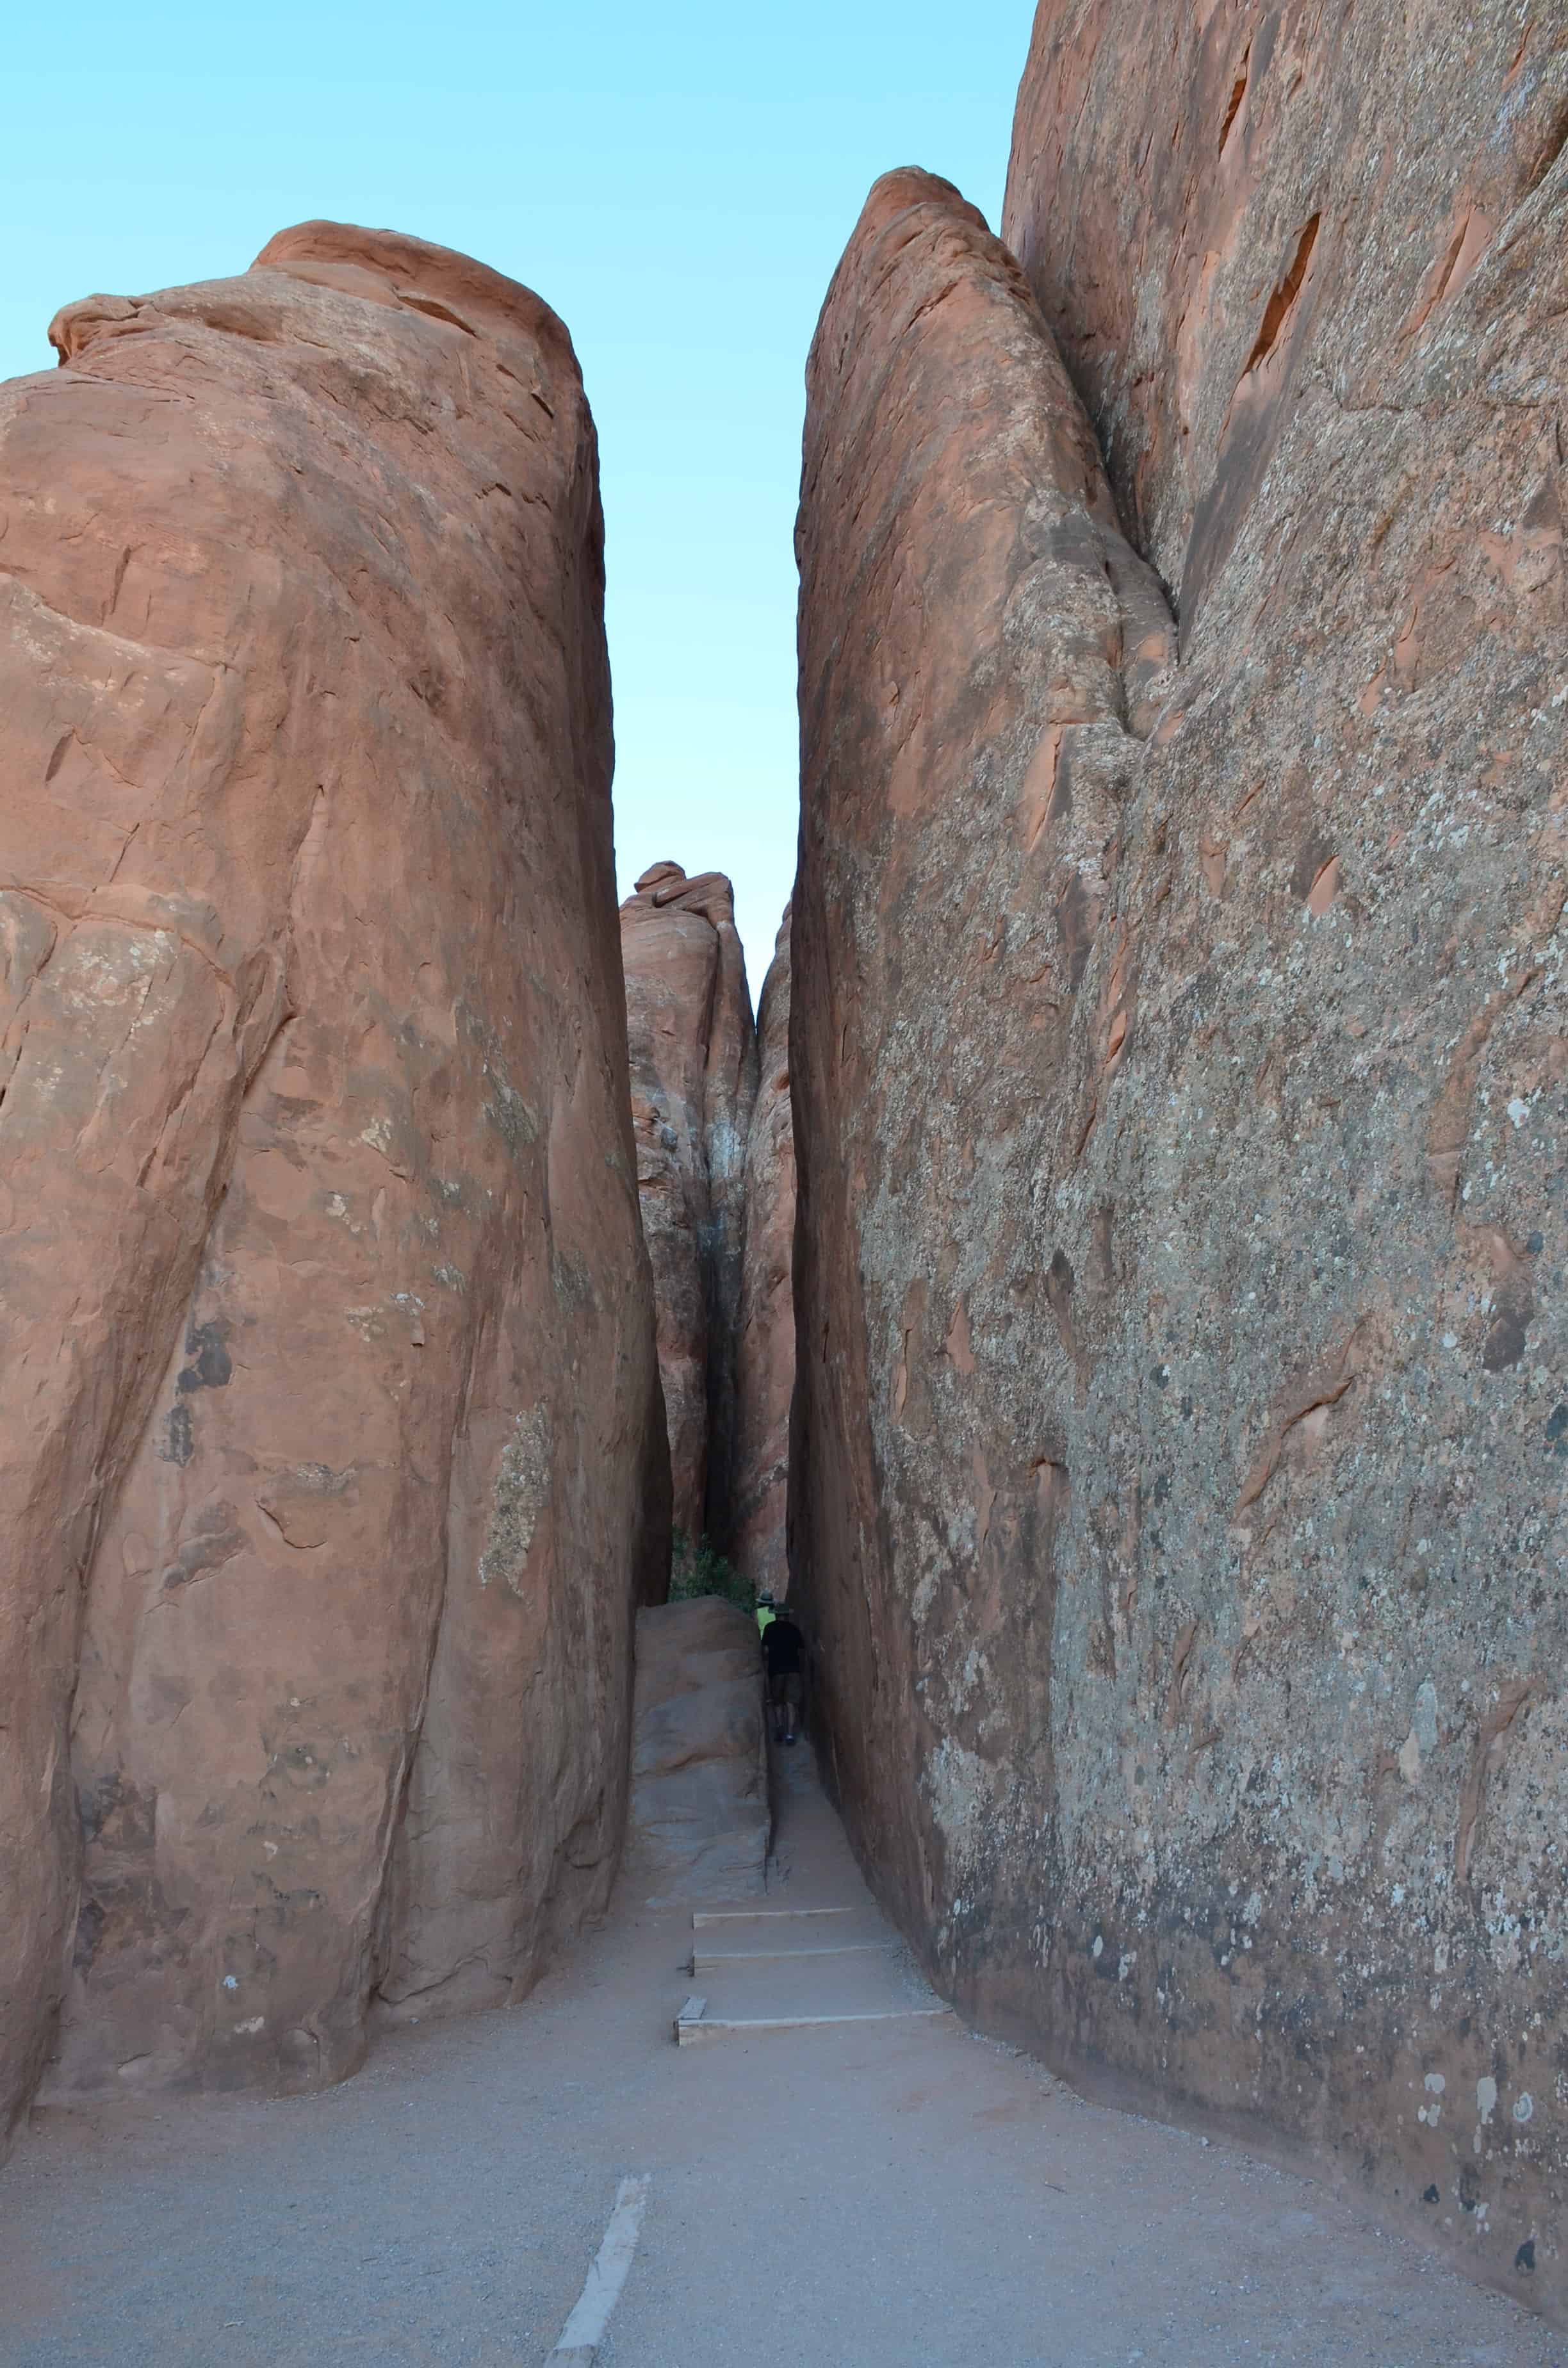 Sand Dune Arch Trail at Arches National Park in Utah